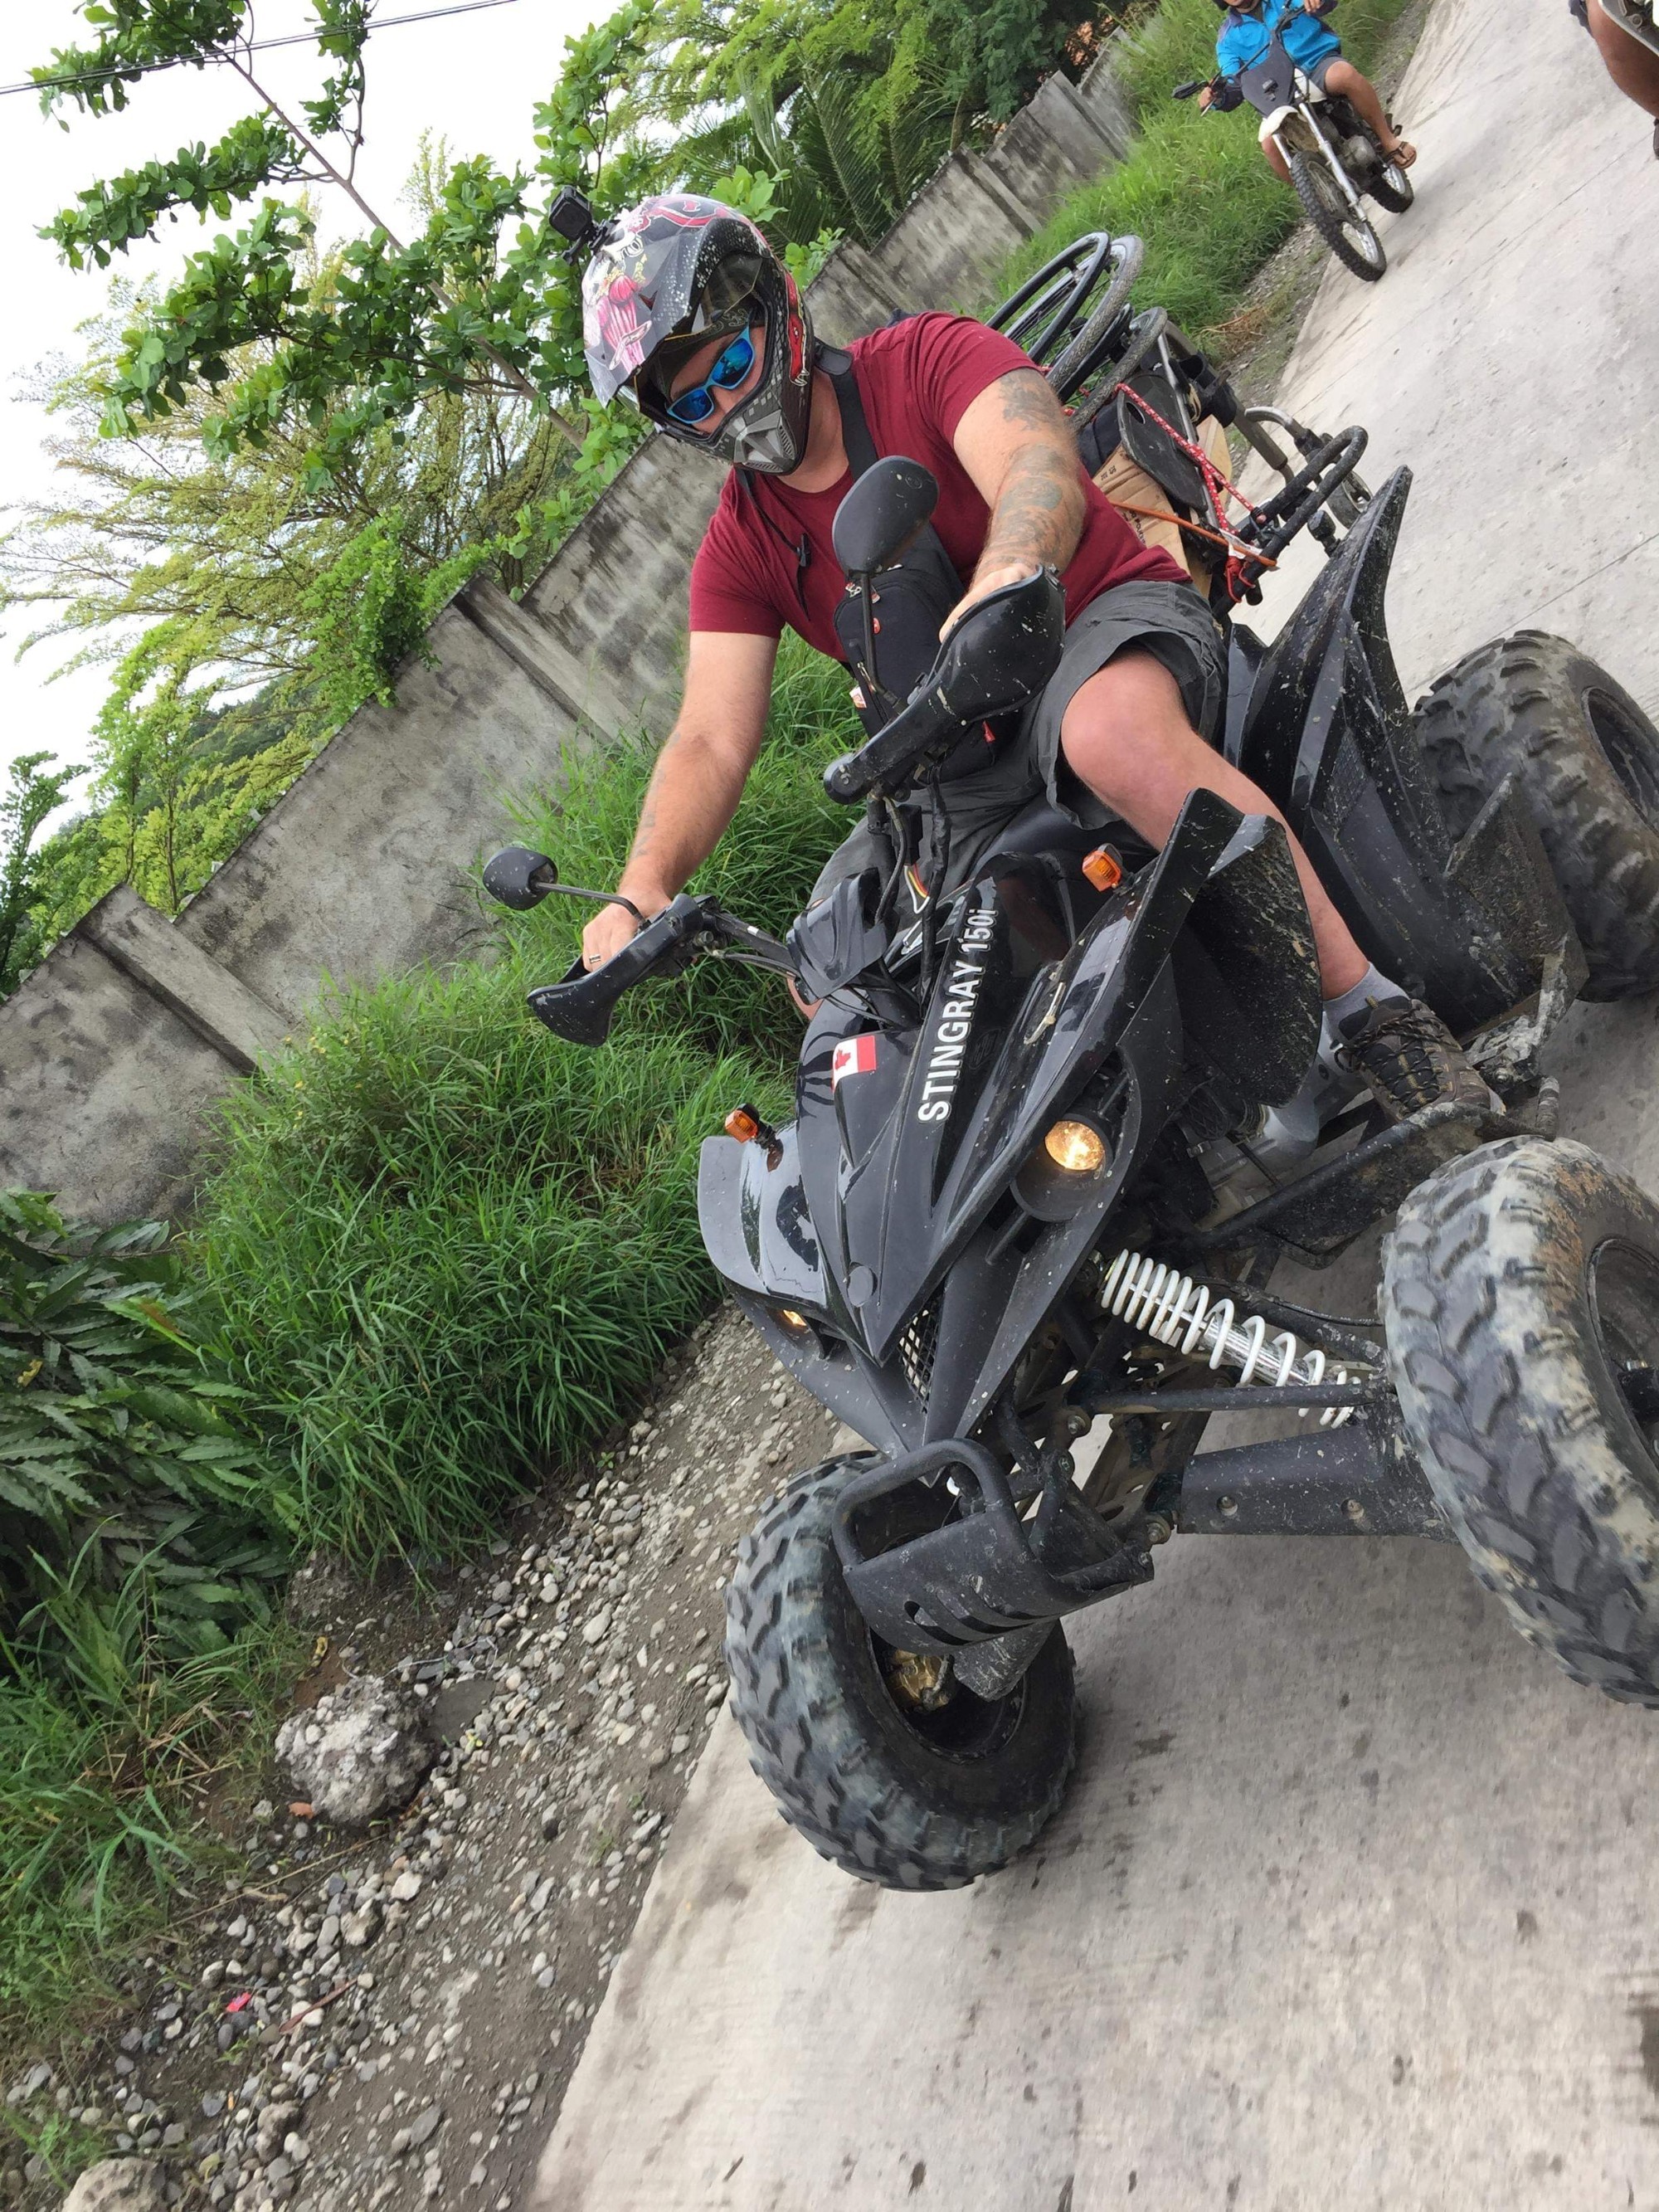 My ATV at my house in Philippines 